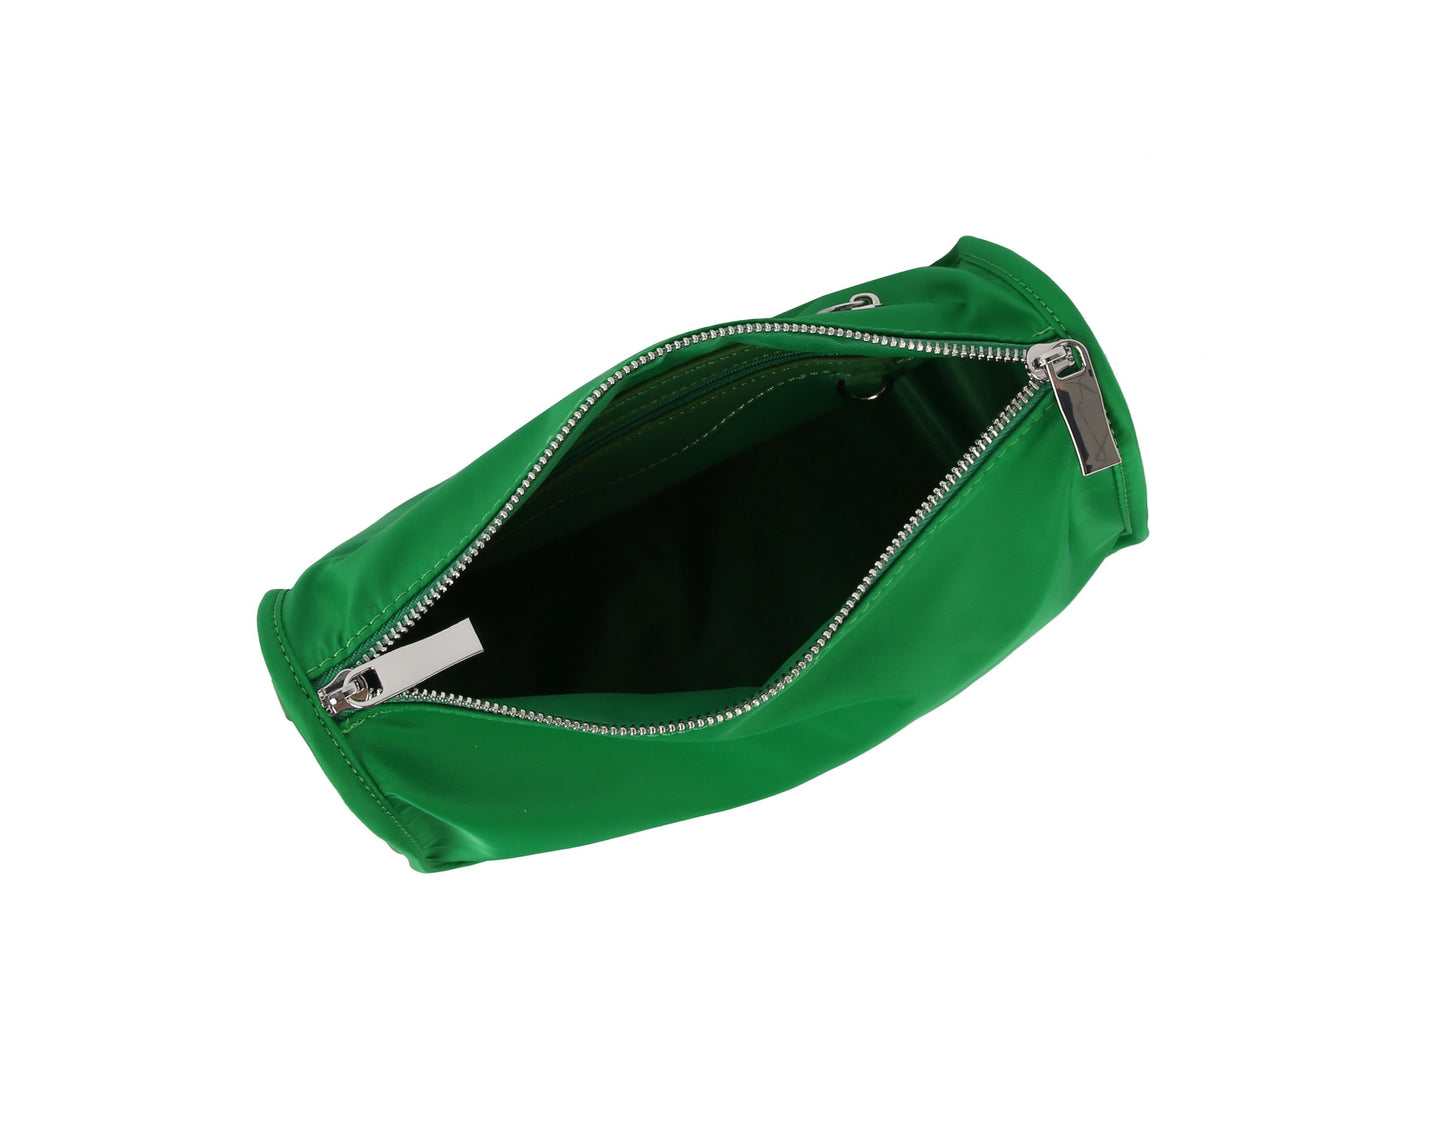 Invest In Yourself Bag In Emerald